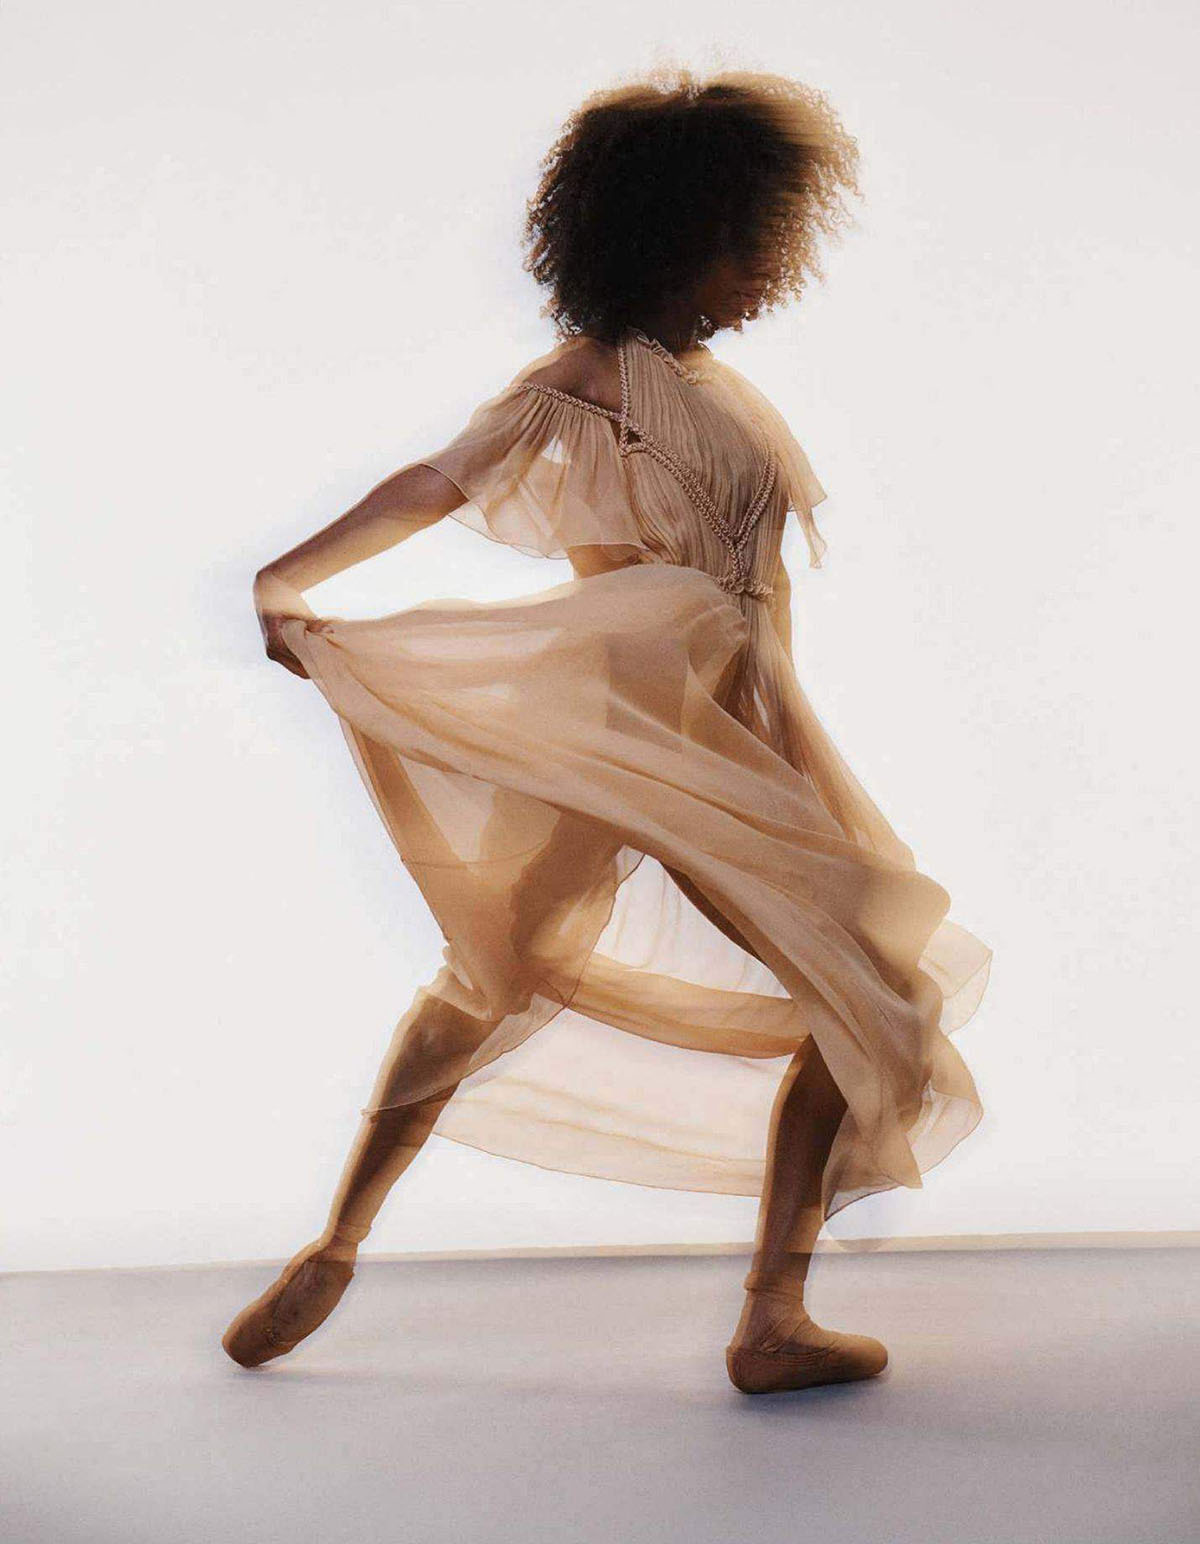 Chloé Lopes Gomes by Jan Welters for Elle France May 21st, 2021